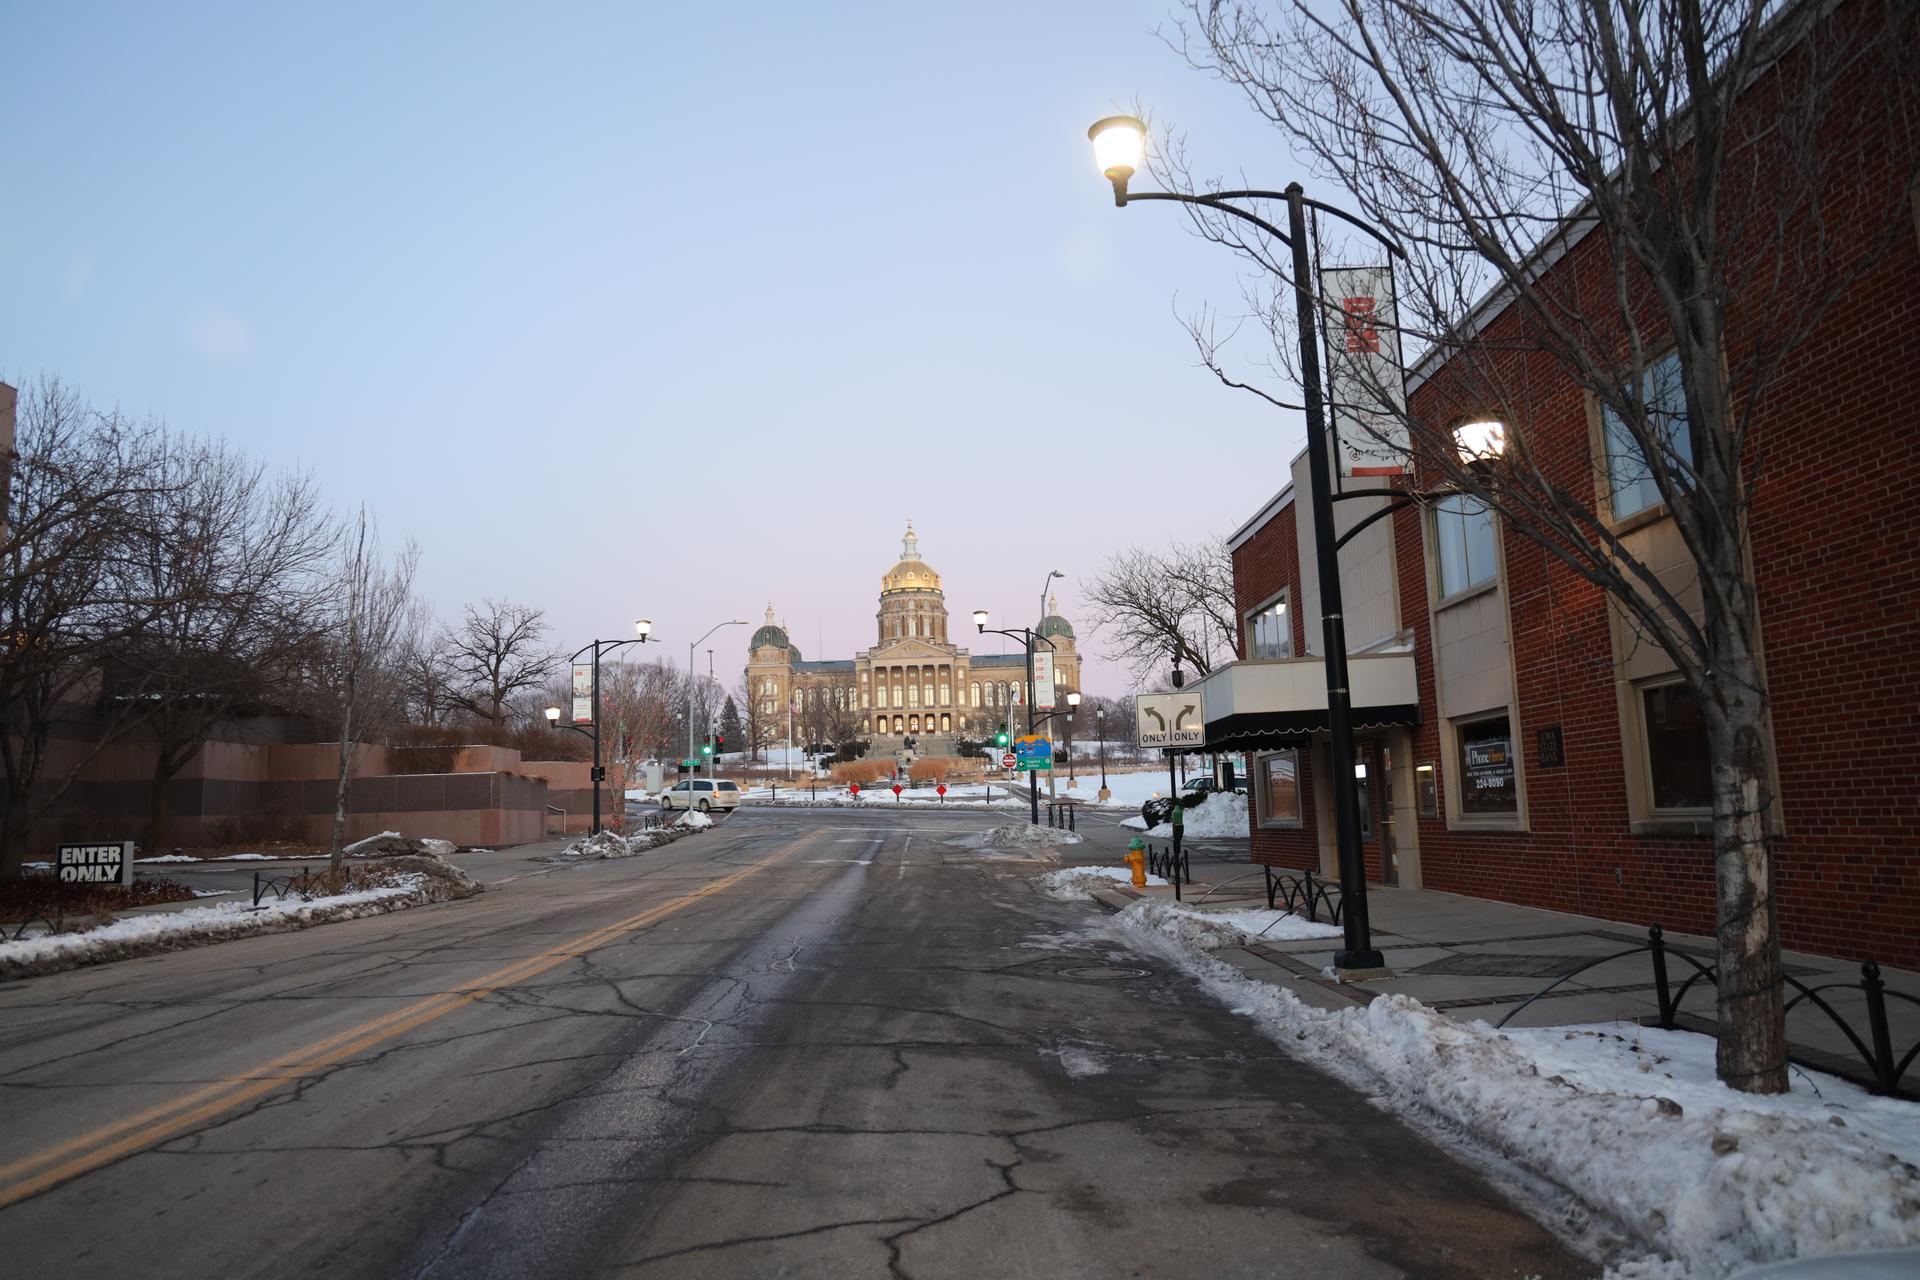 The Iowa State Capitol is seen in Iowa's capital city, Des Moines.  